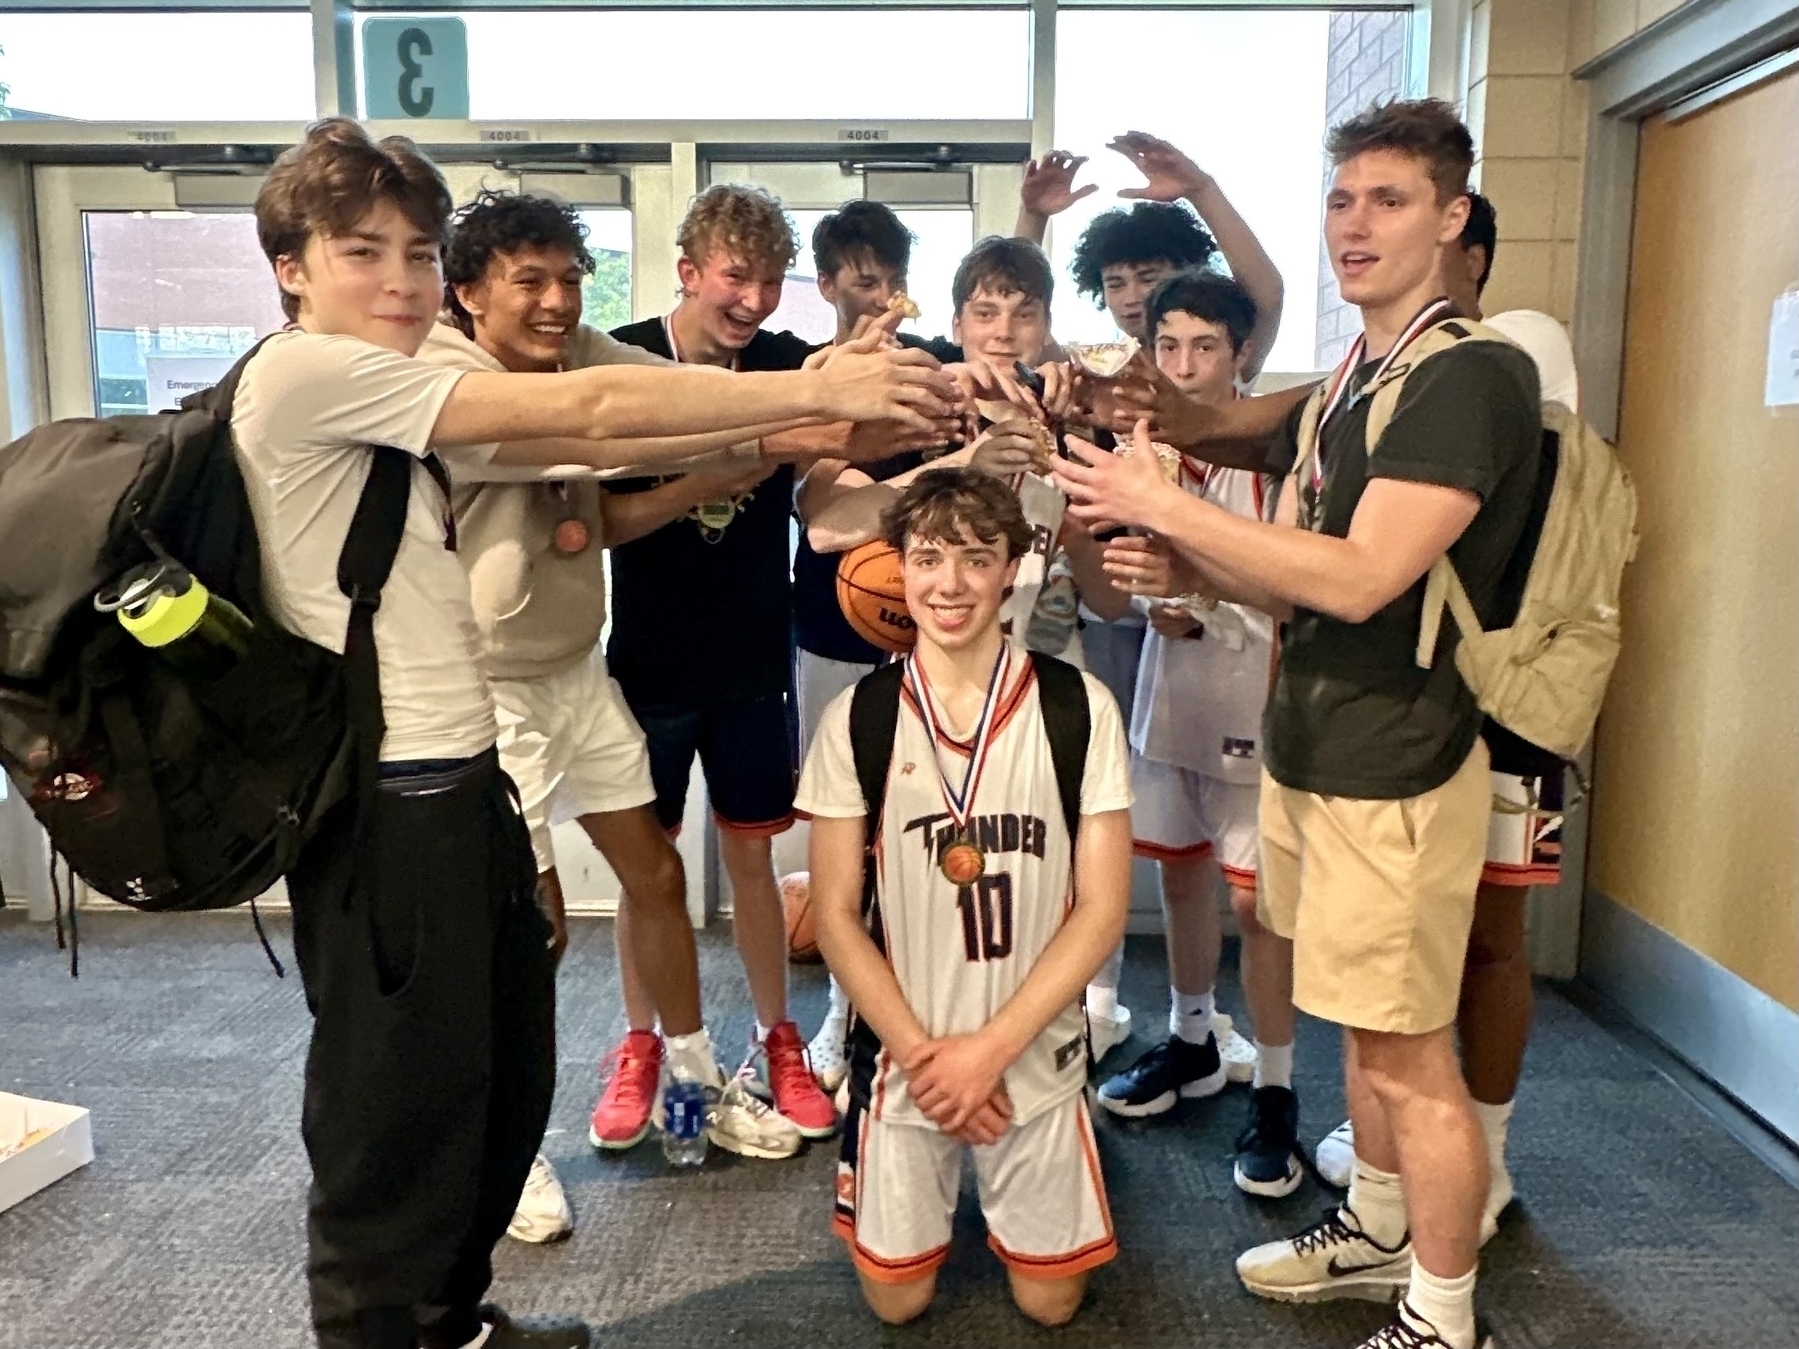 Auto-generated description: A group of young basketball players celebrates with a trophy in a hallway, some wearing medals and uniforms